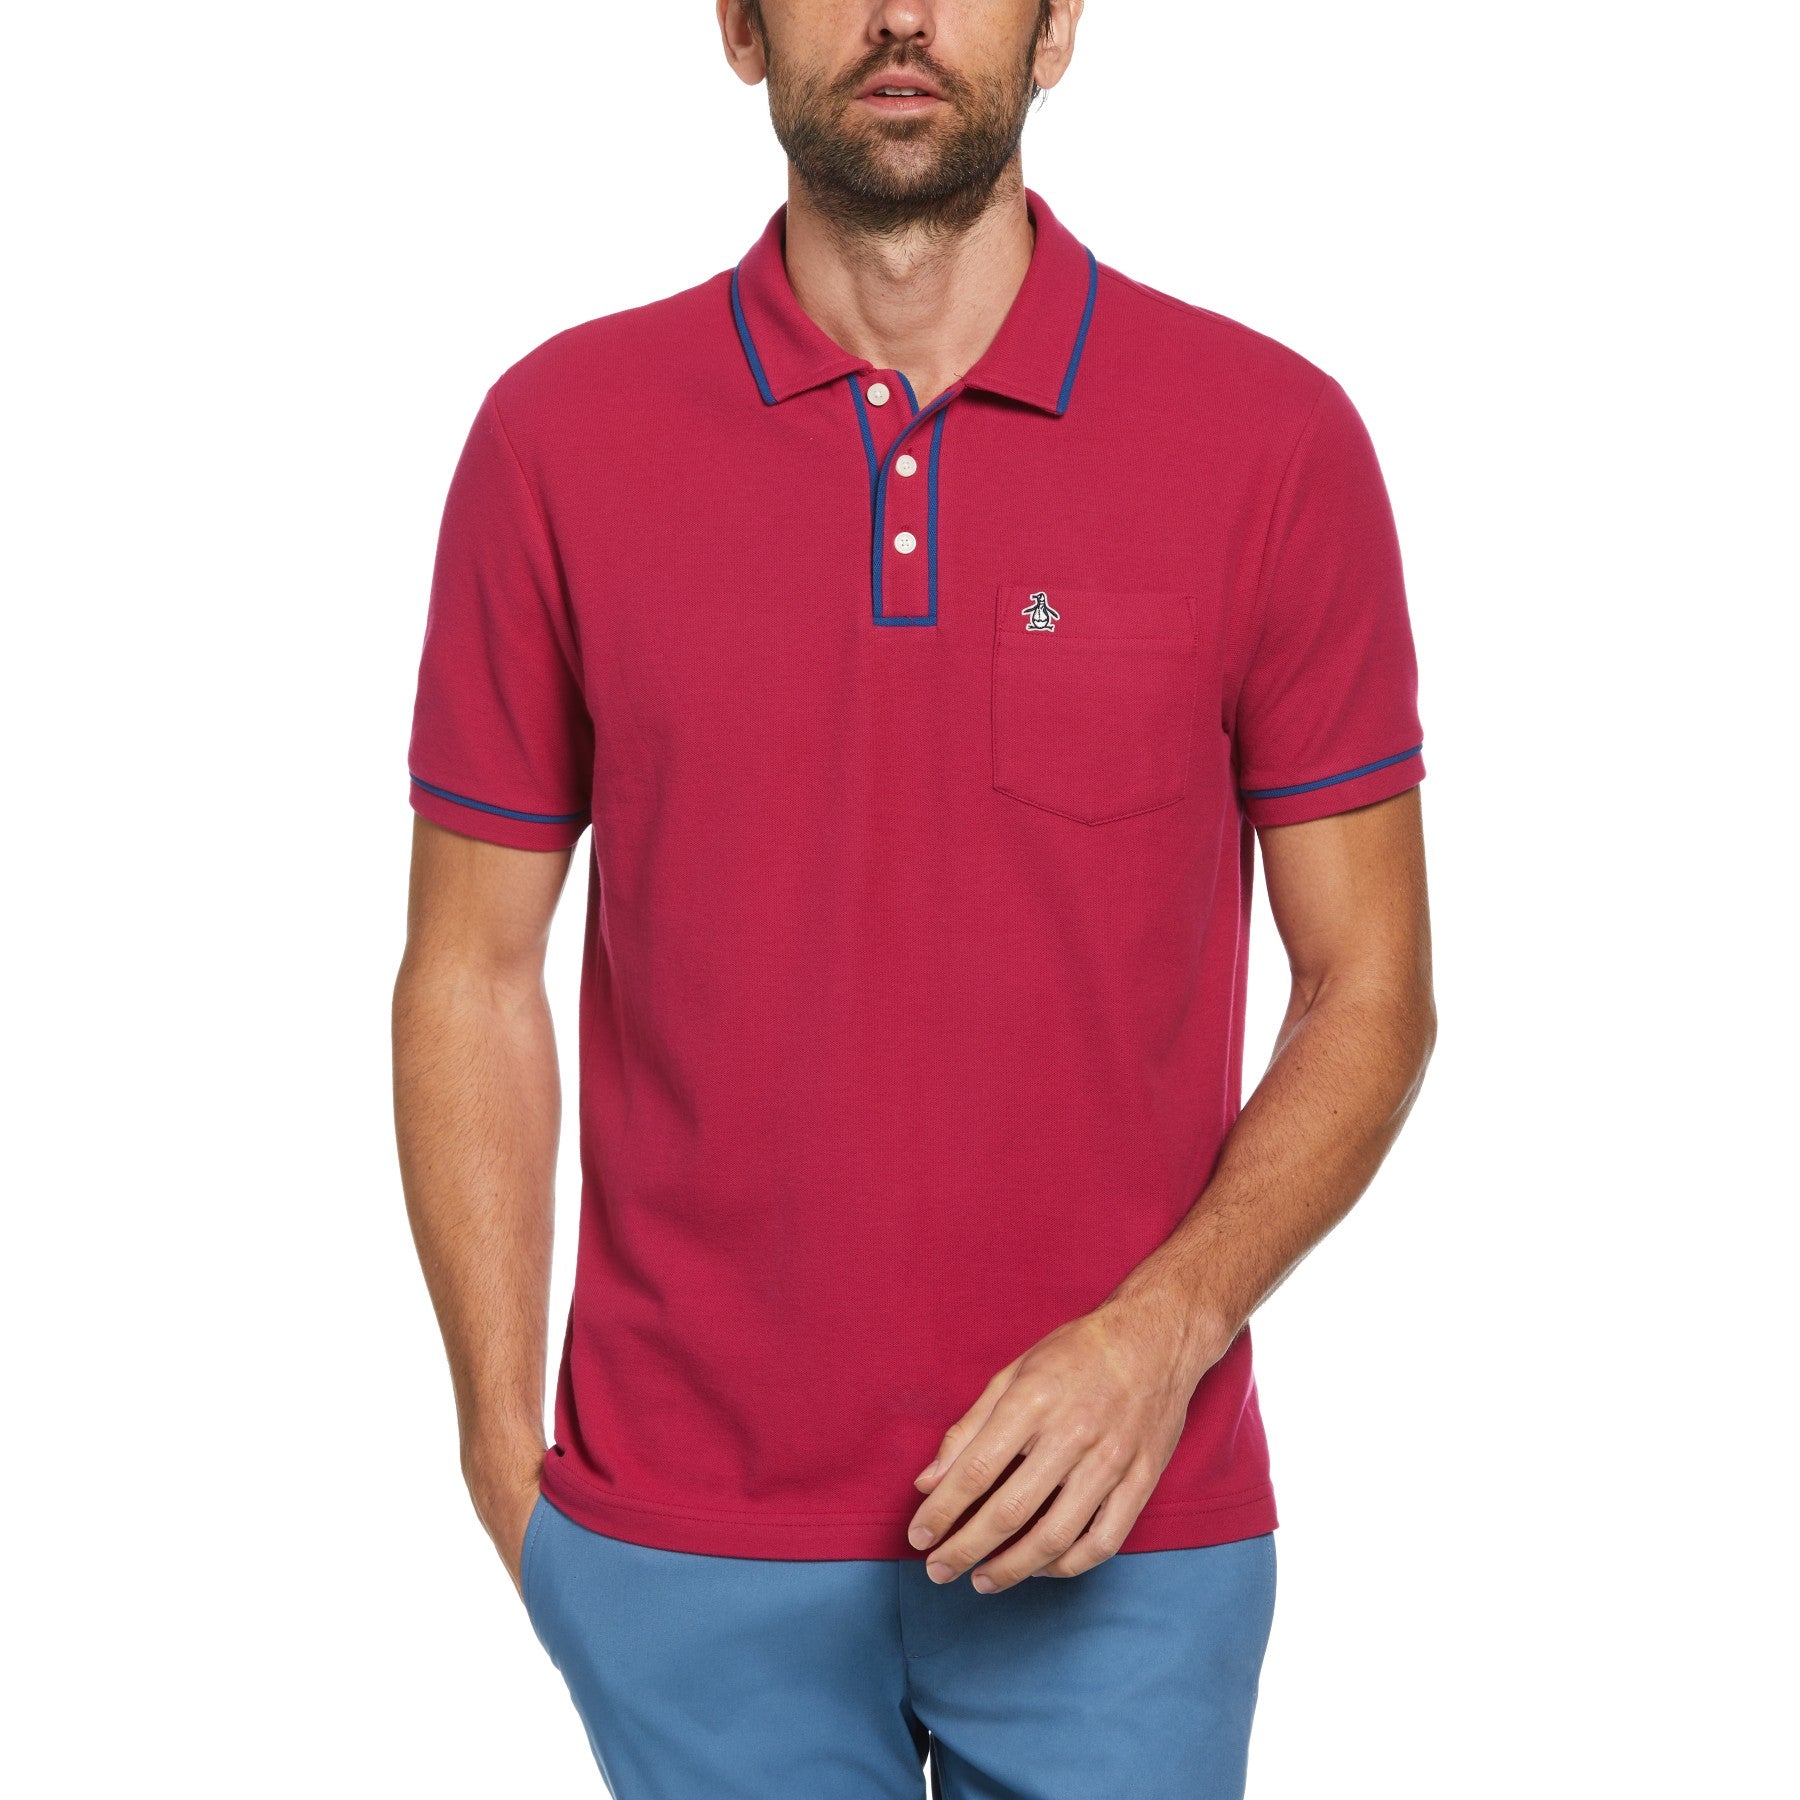 View Earl Organic Cotton Polo Shirt In Sangria information